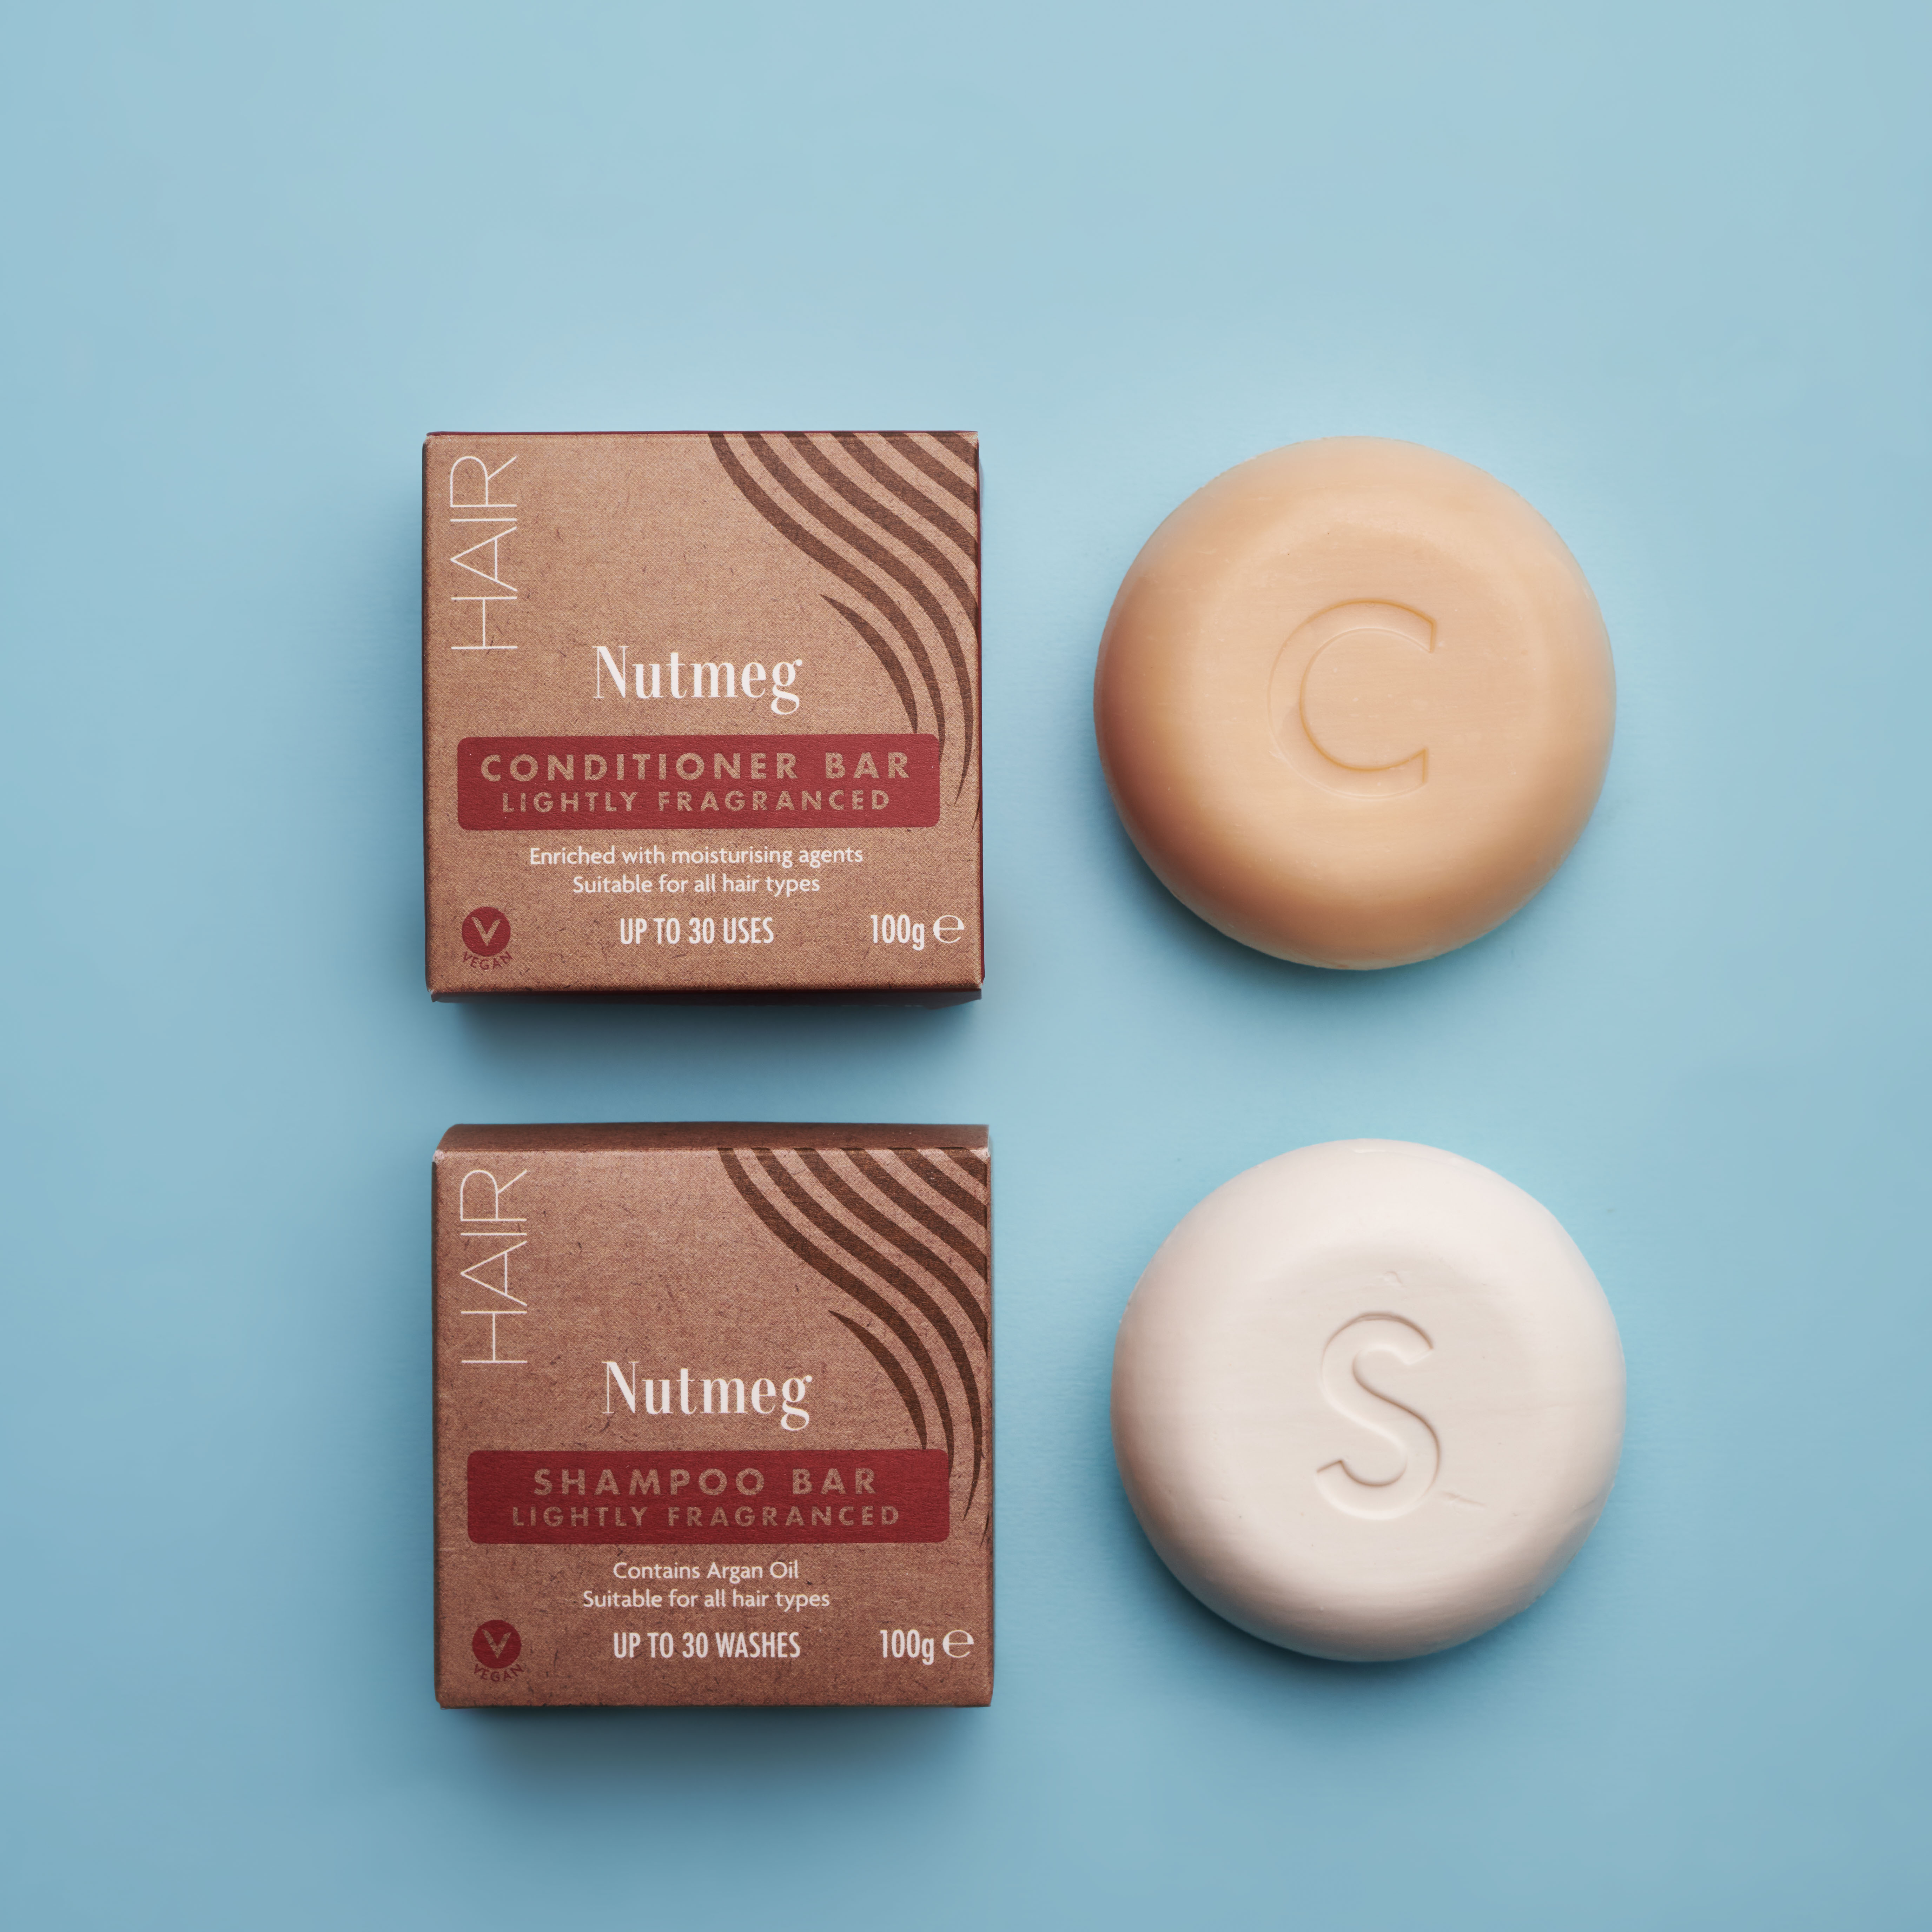 Morrisons becomes first supermarket to launch own-brand shampoo & conditioner bars